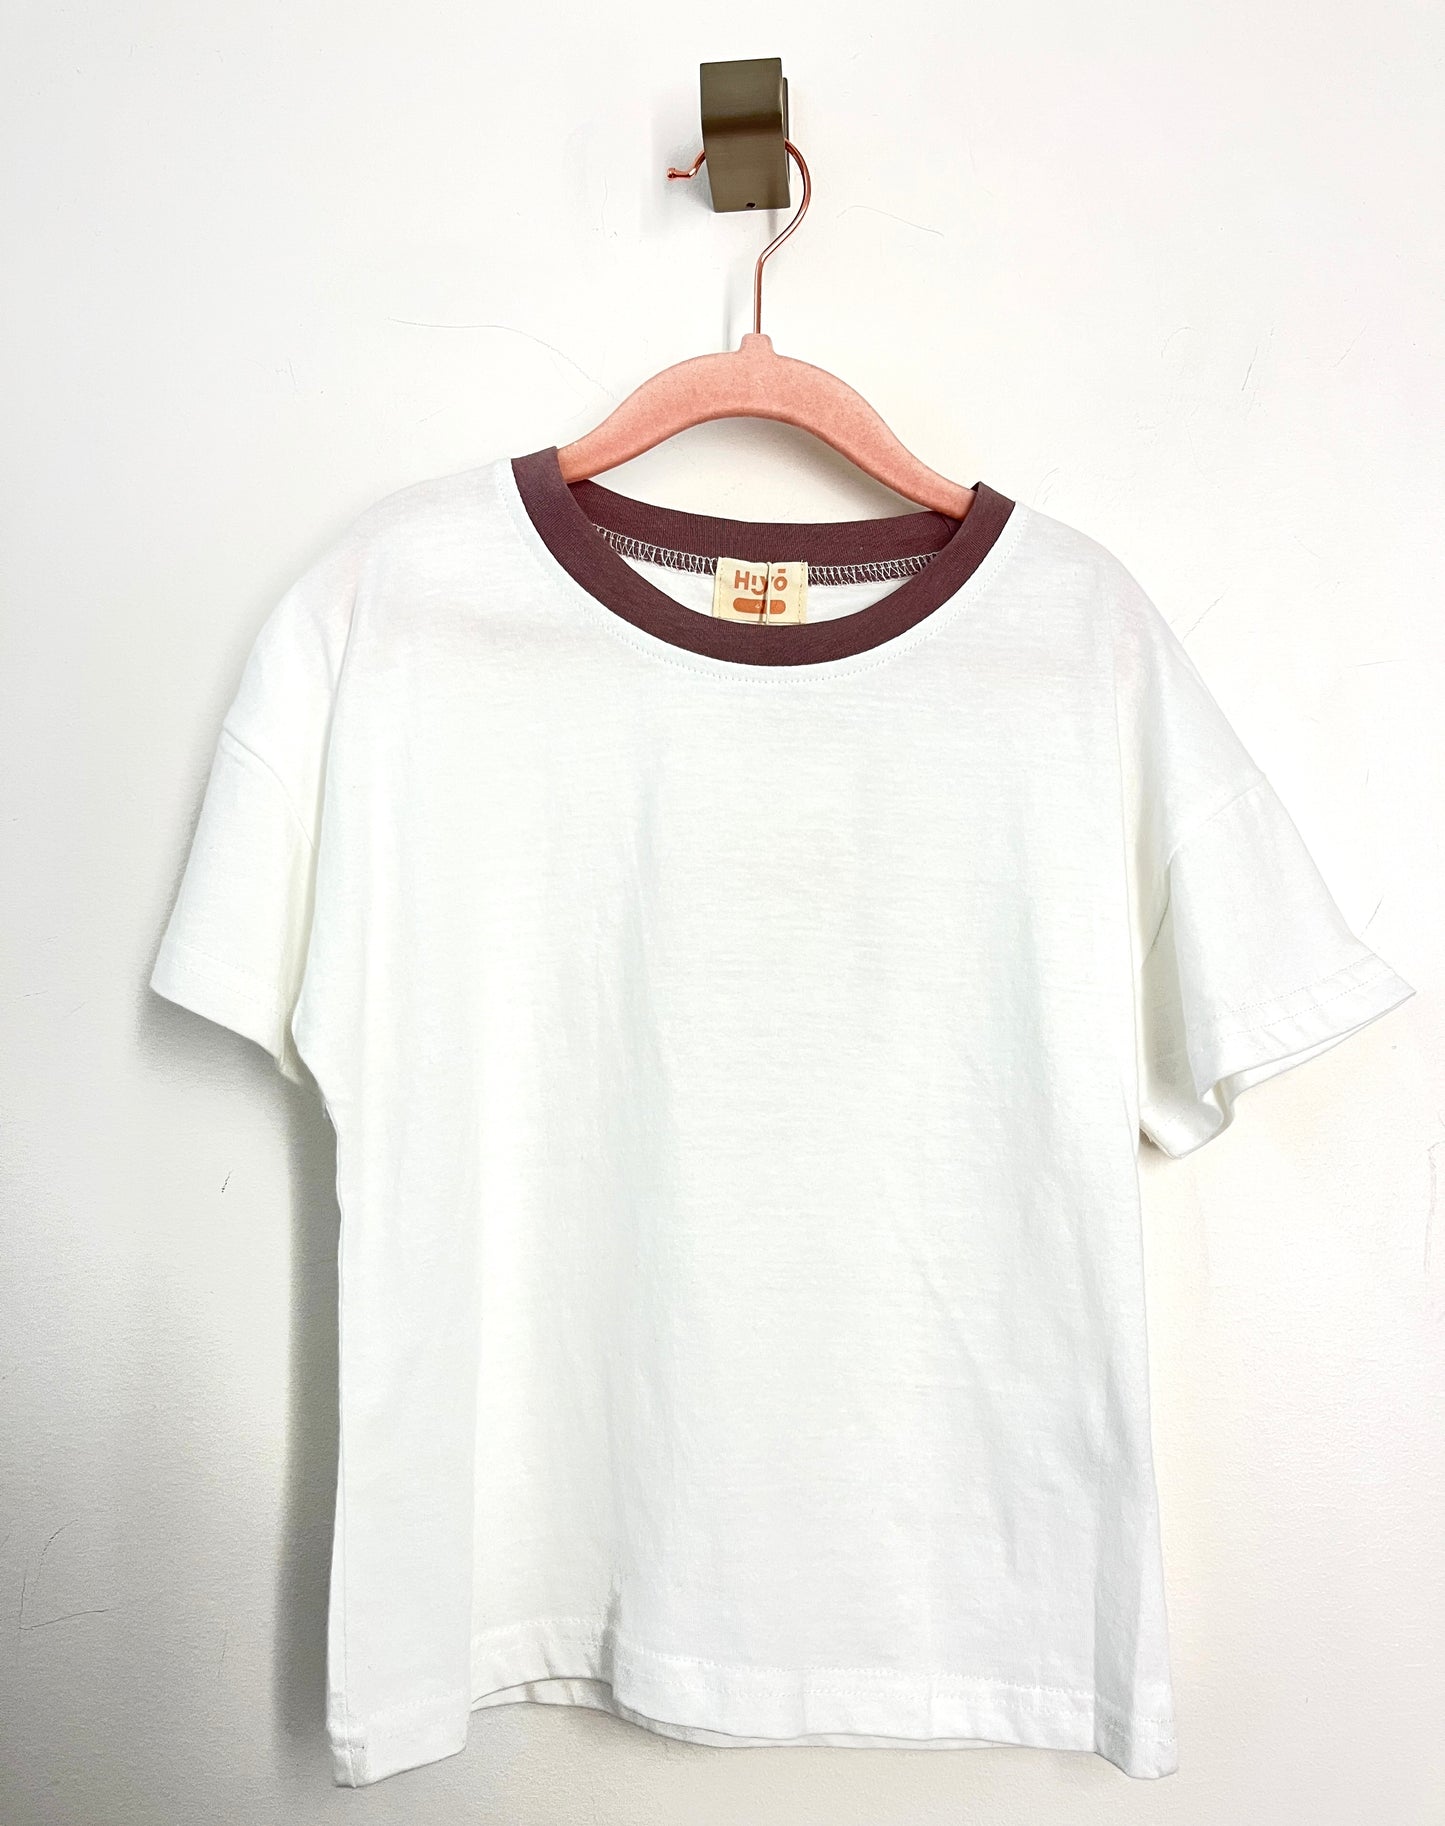 Two-Toned Tee in White with Lavender Trim